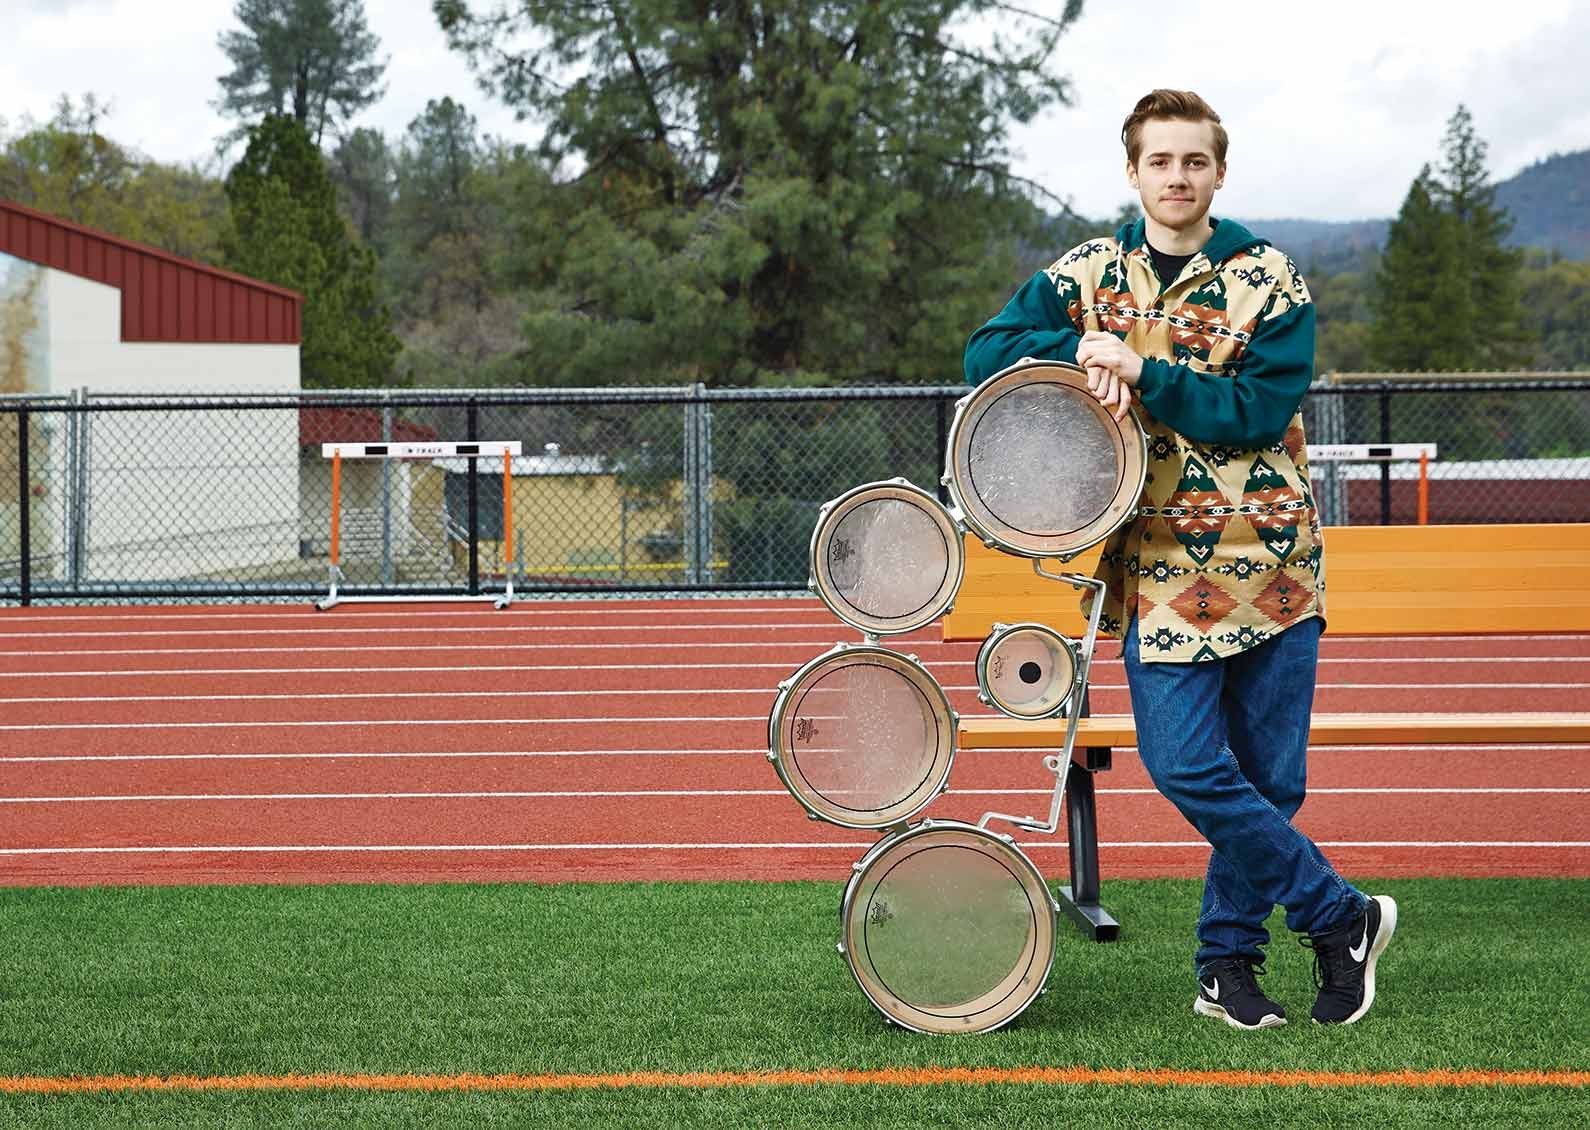 Oliver Bishop with drumline equipment at his high school track field.